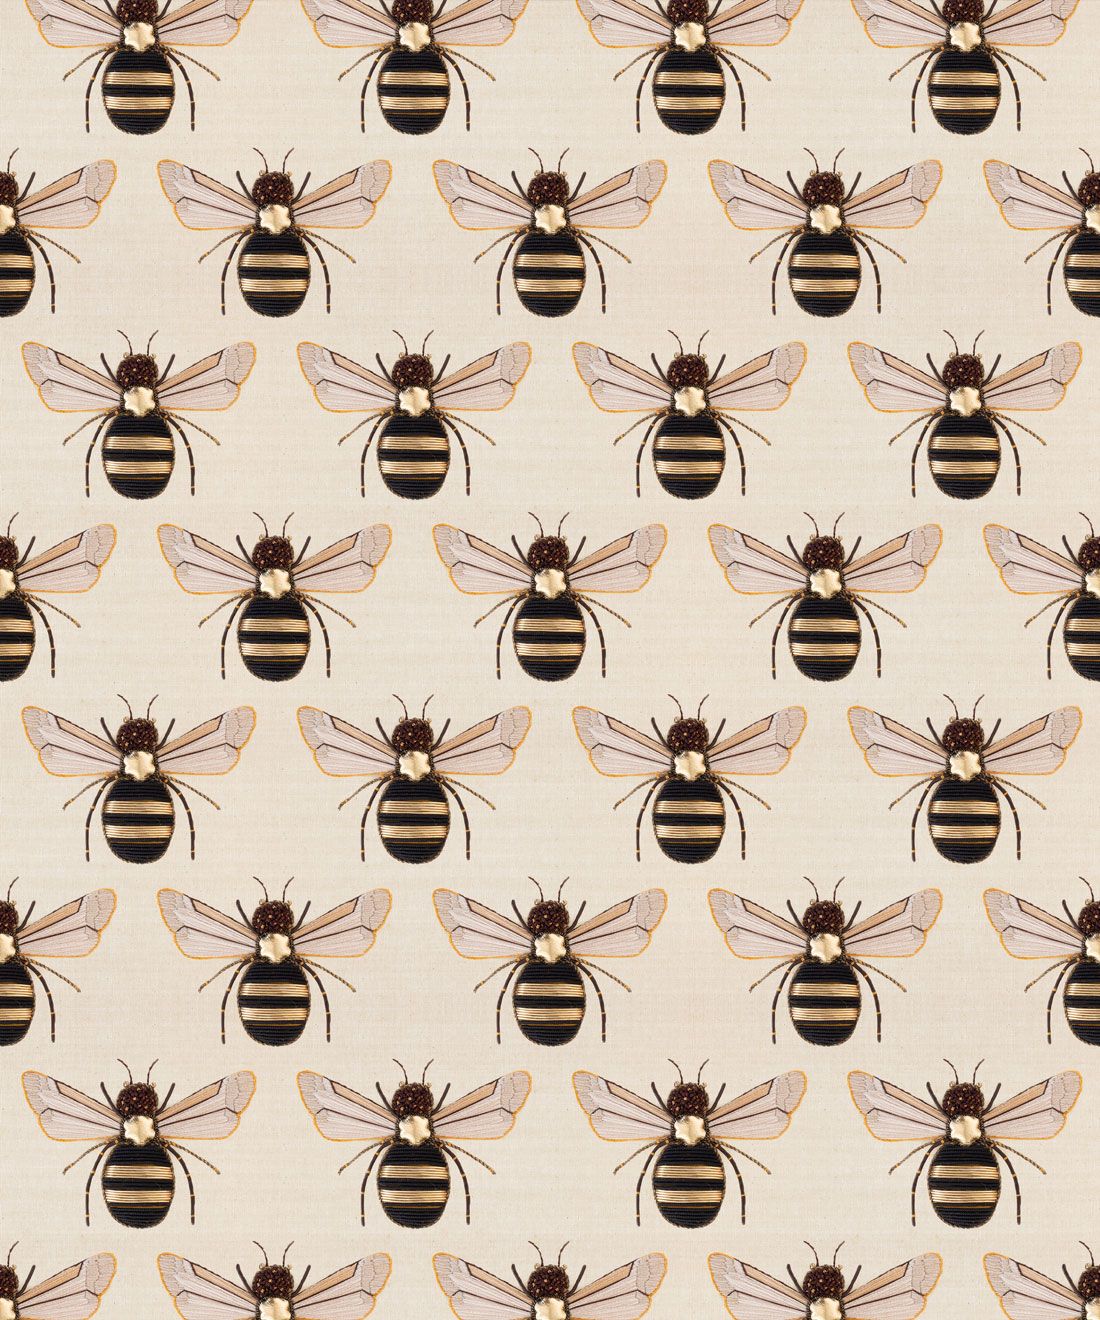 Golden Bee Embroidery, A wallpaper featuring bees